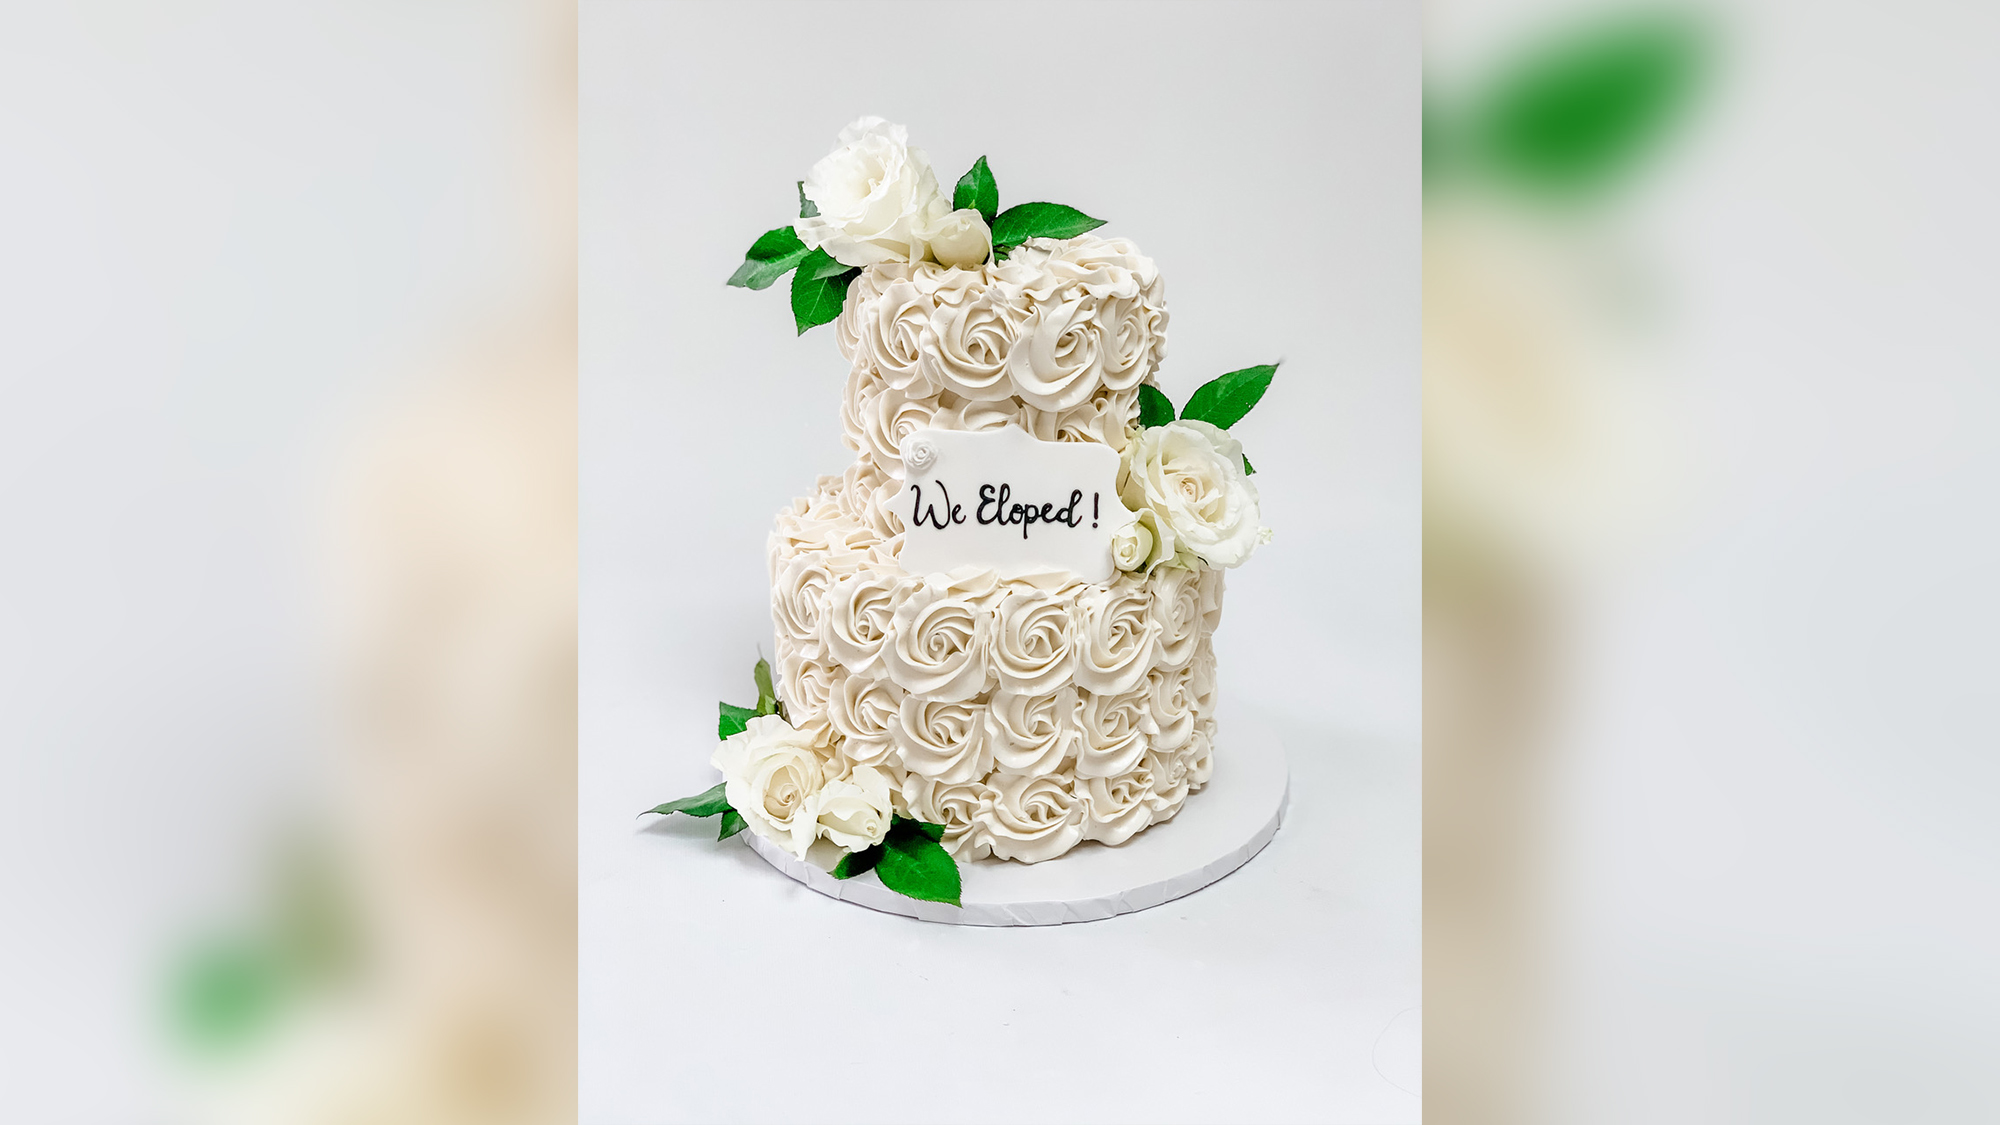 how did the tradition of serving a wedding cake at a wedding reception originate and what does it symbolize